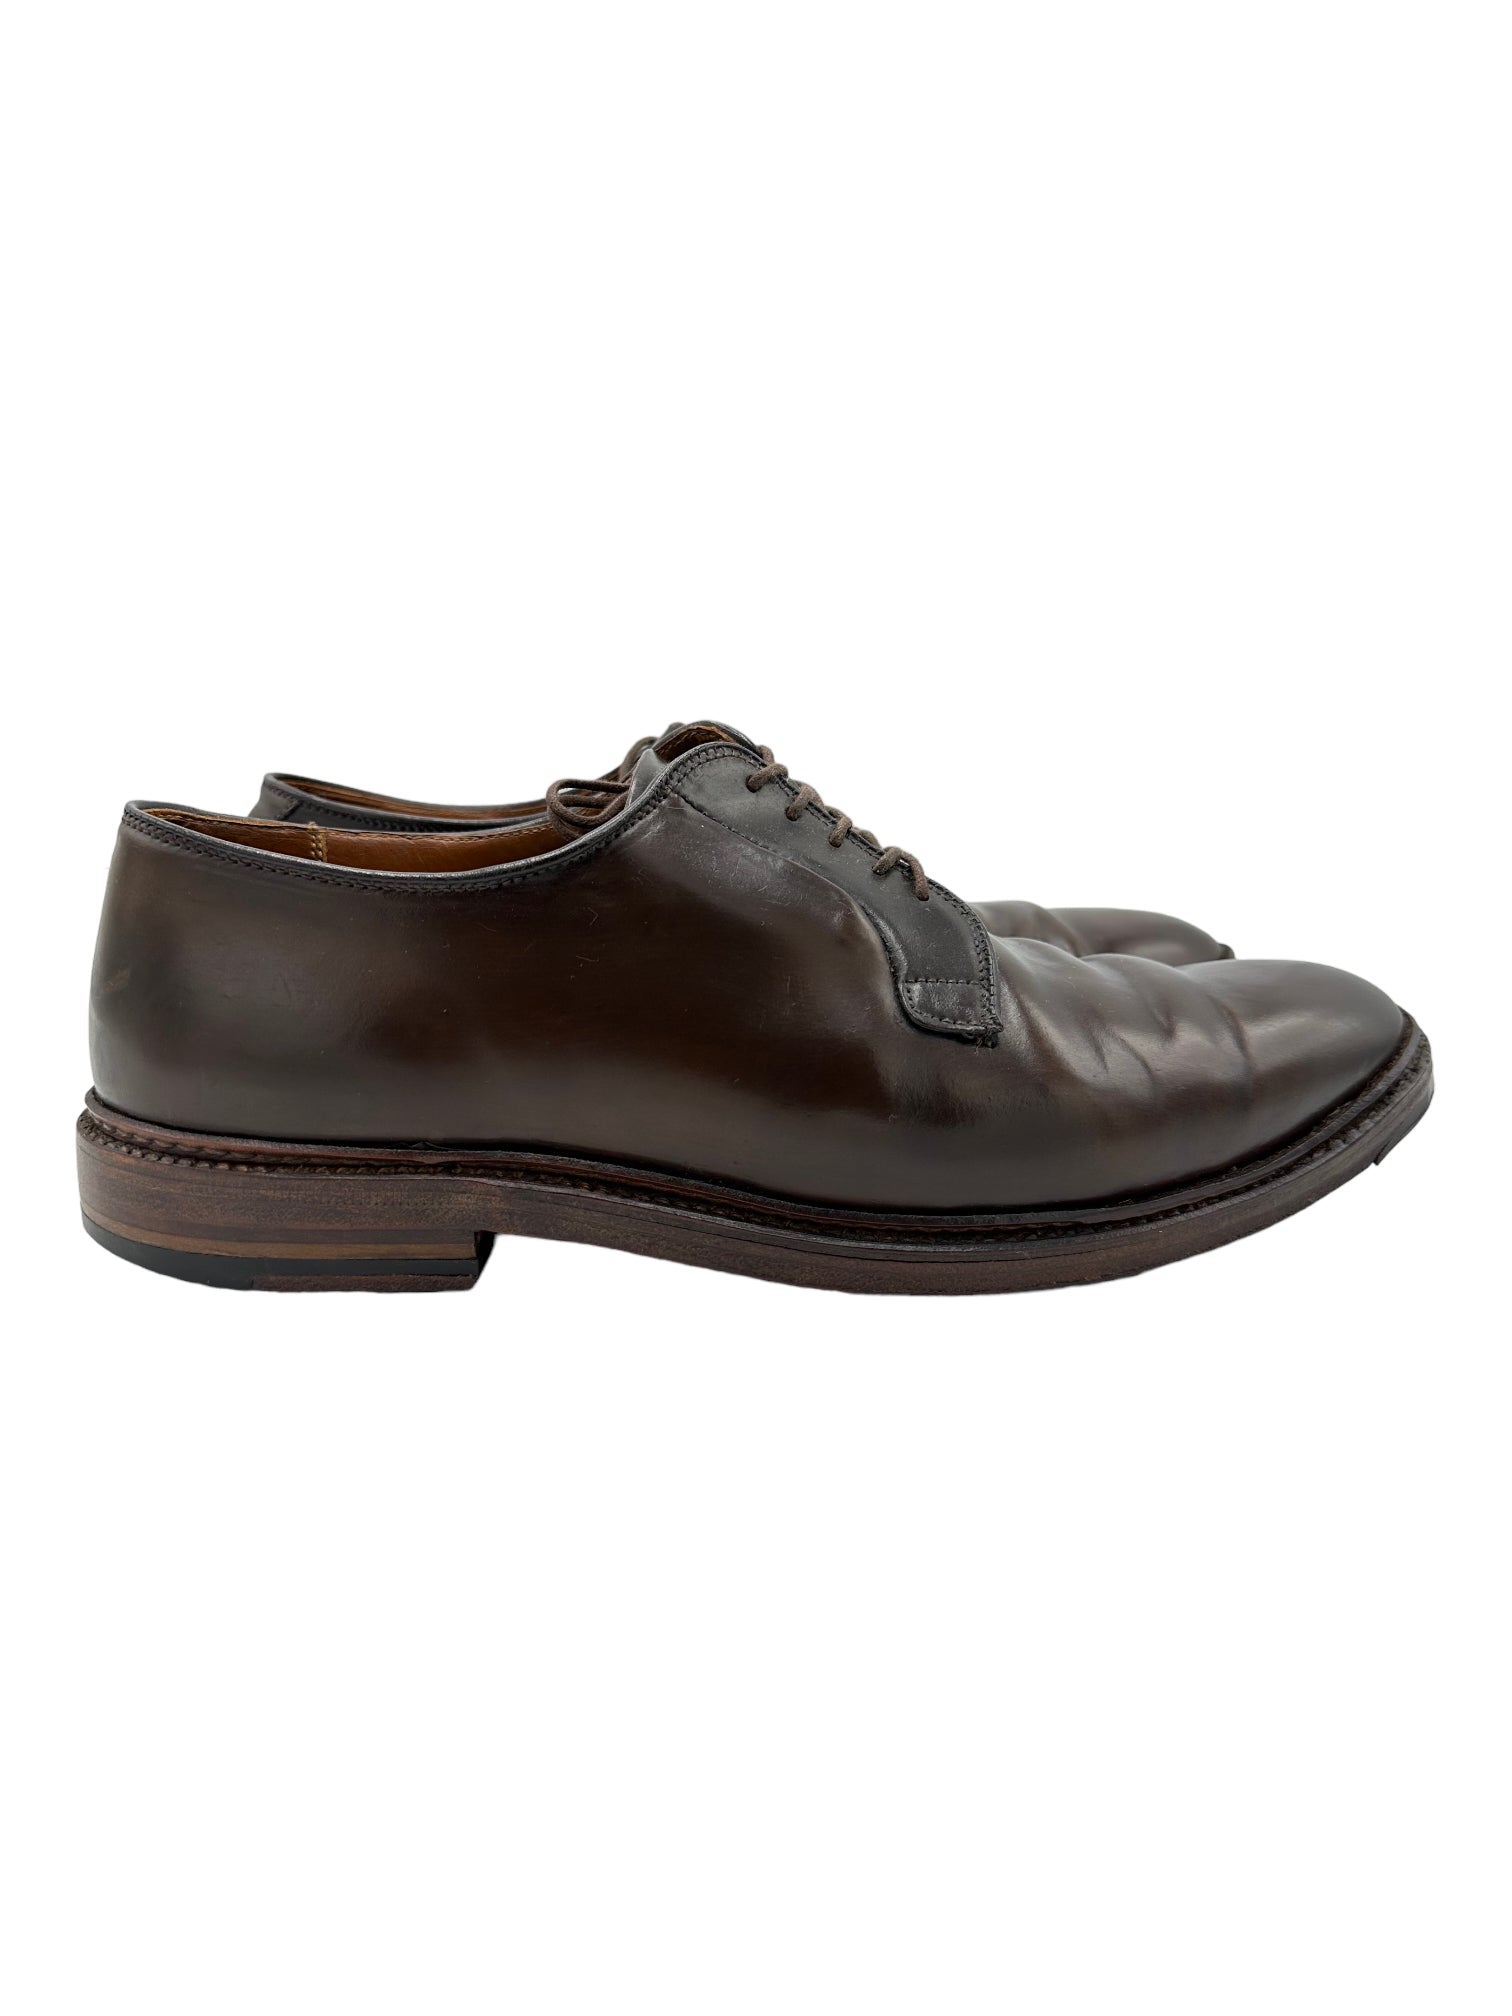 Alden 93911 Cigar Shell Cordovan Plain Toe Blucher Dress Shoes - Genuine Design Luxury Consignment for Men. New & Pre-Owned Clothing, Shoes, & Accessories. Calgary, Canada